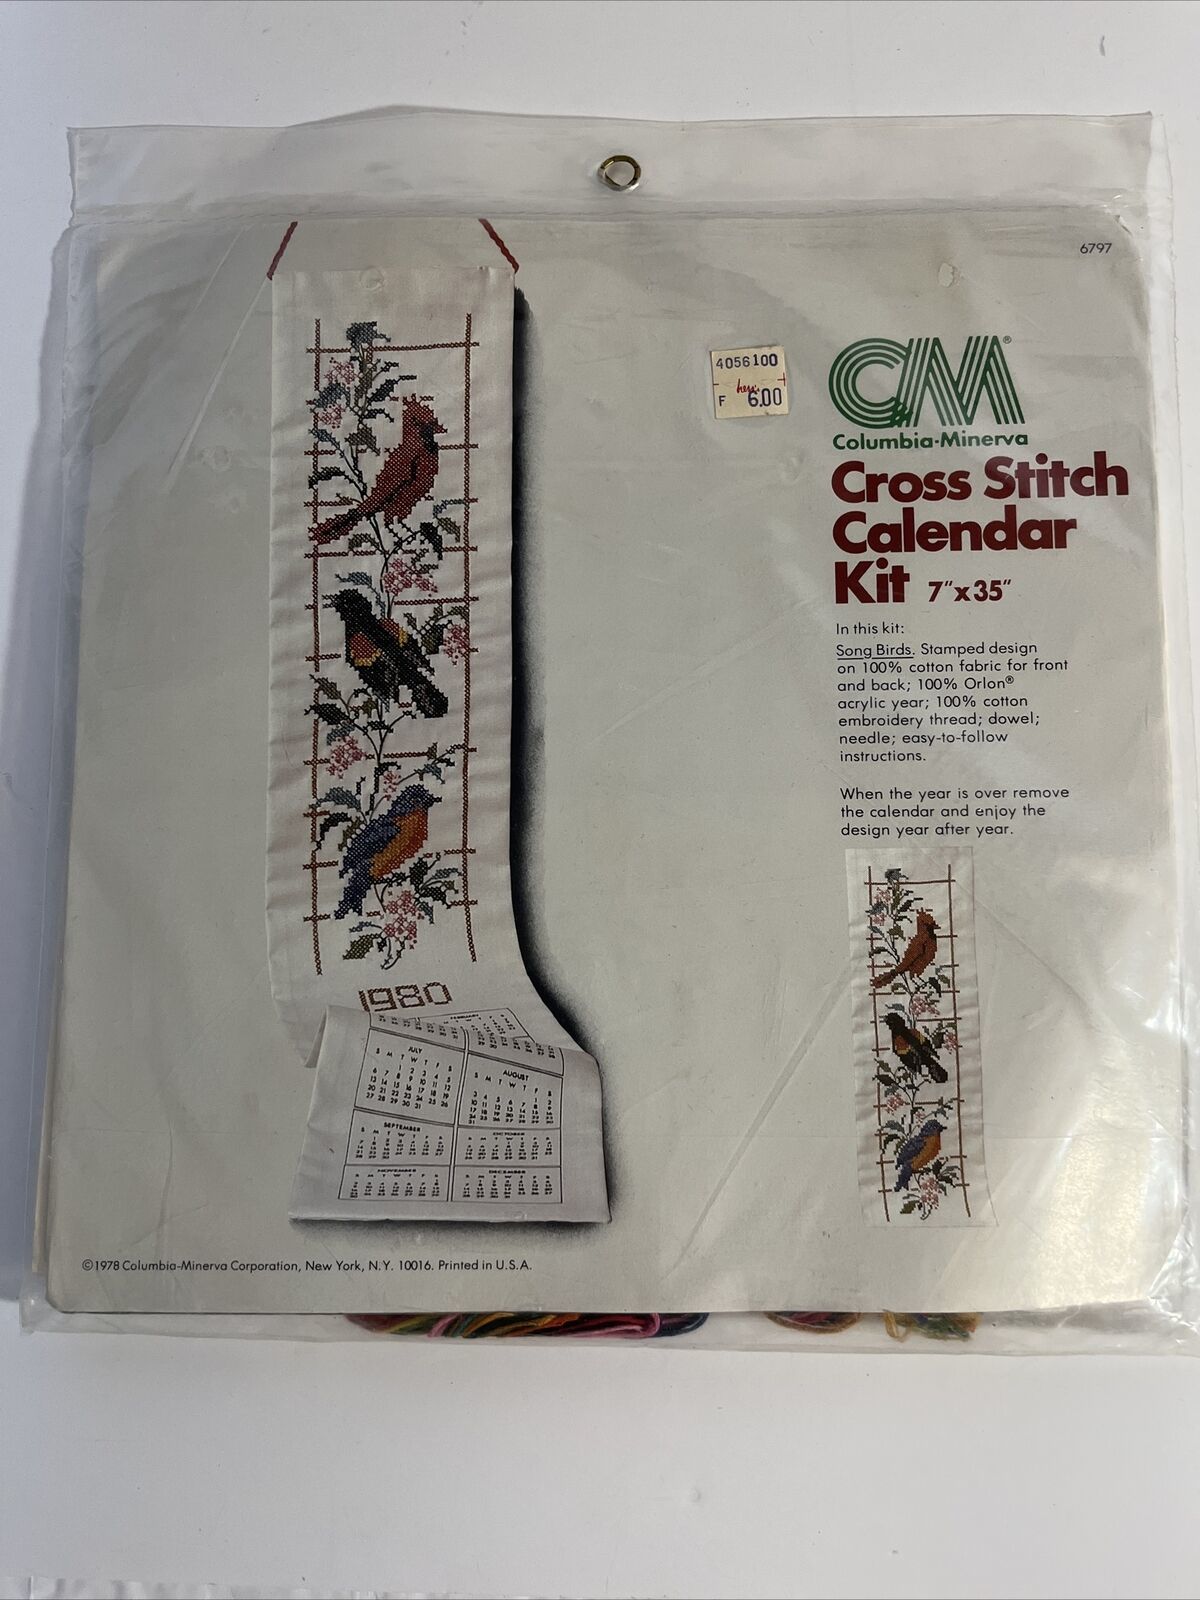 Primary image for 1978 Columbia-Minerva Stamped Cross Stitch Kit Calendar “Song Birds” 7”x35” USA